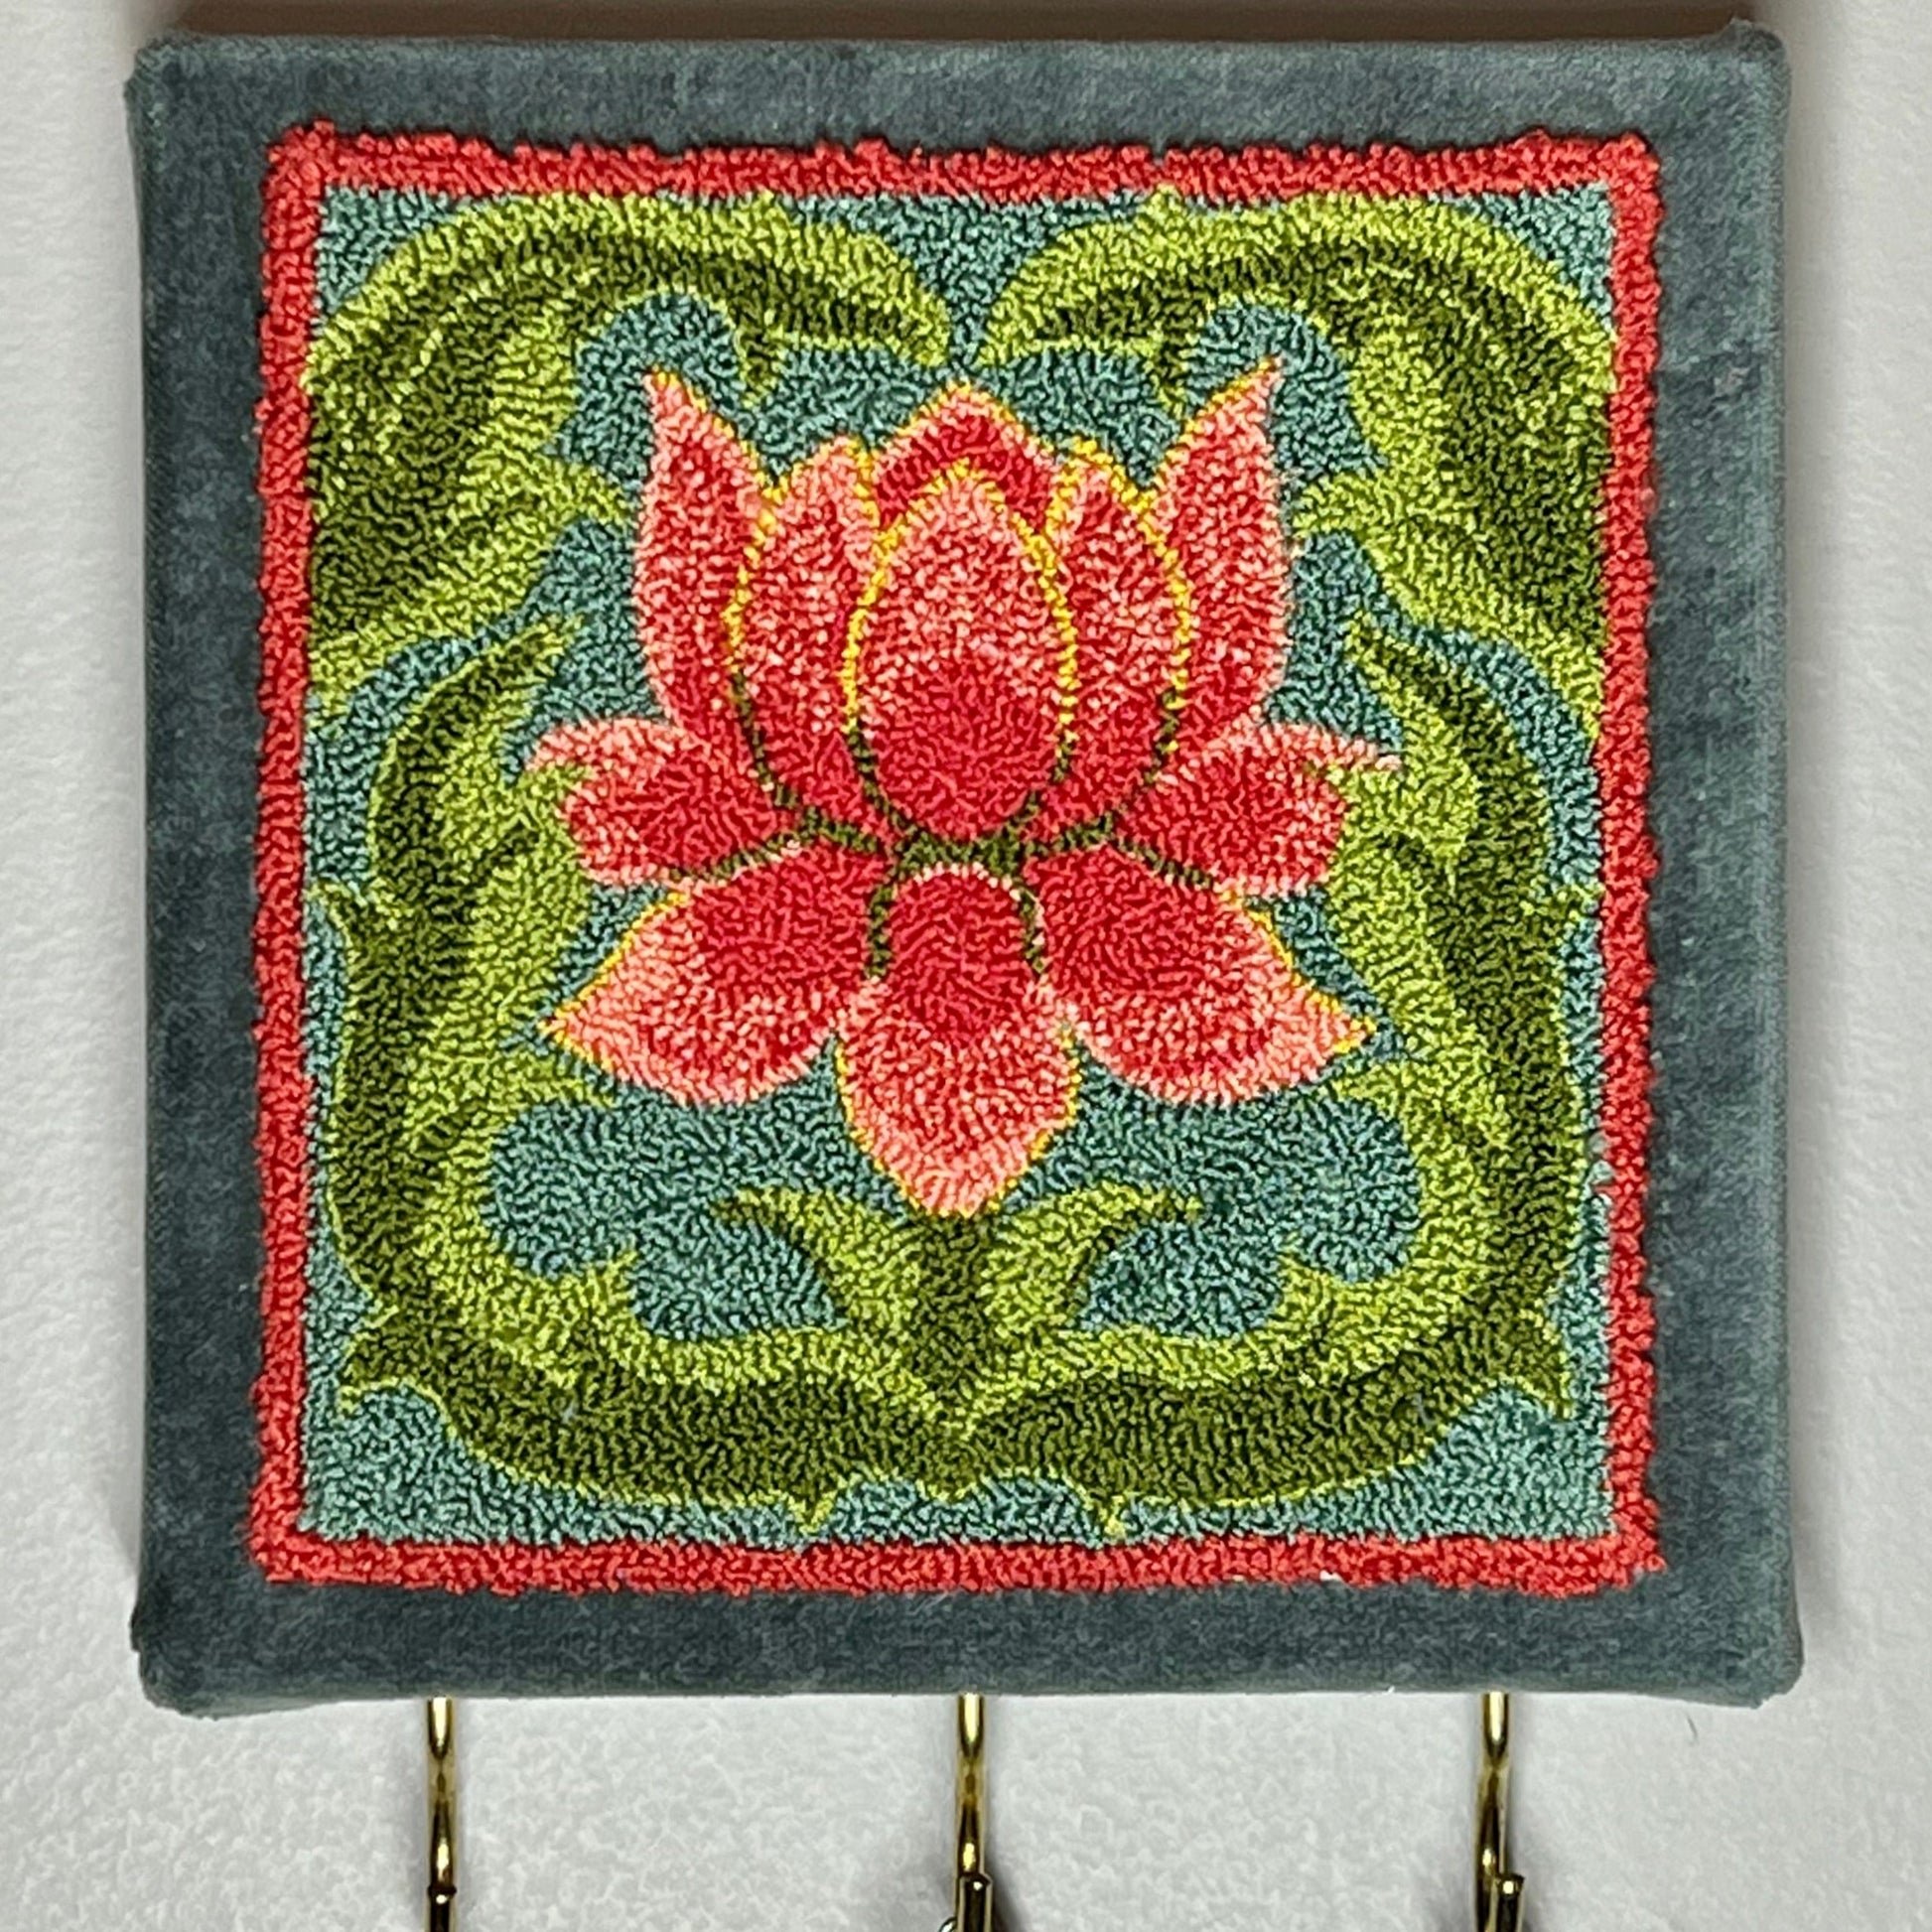 Blooming-Punch Needle Pattern With DMC Floss thread kit, available as a Paper or Cloth Pattern by Orphaned Wool.